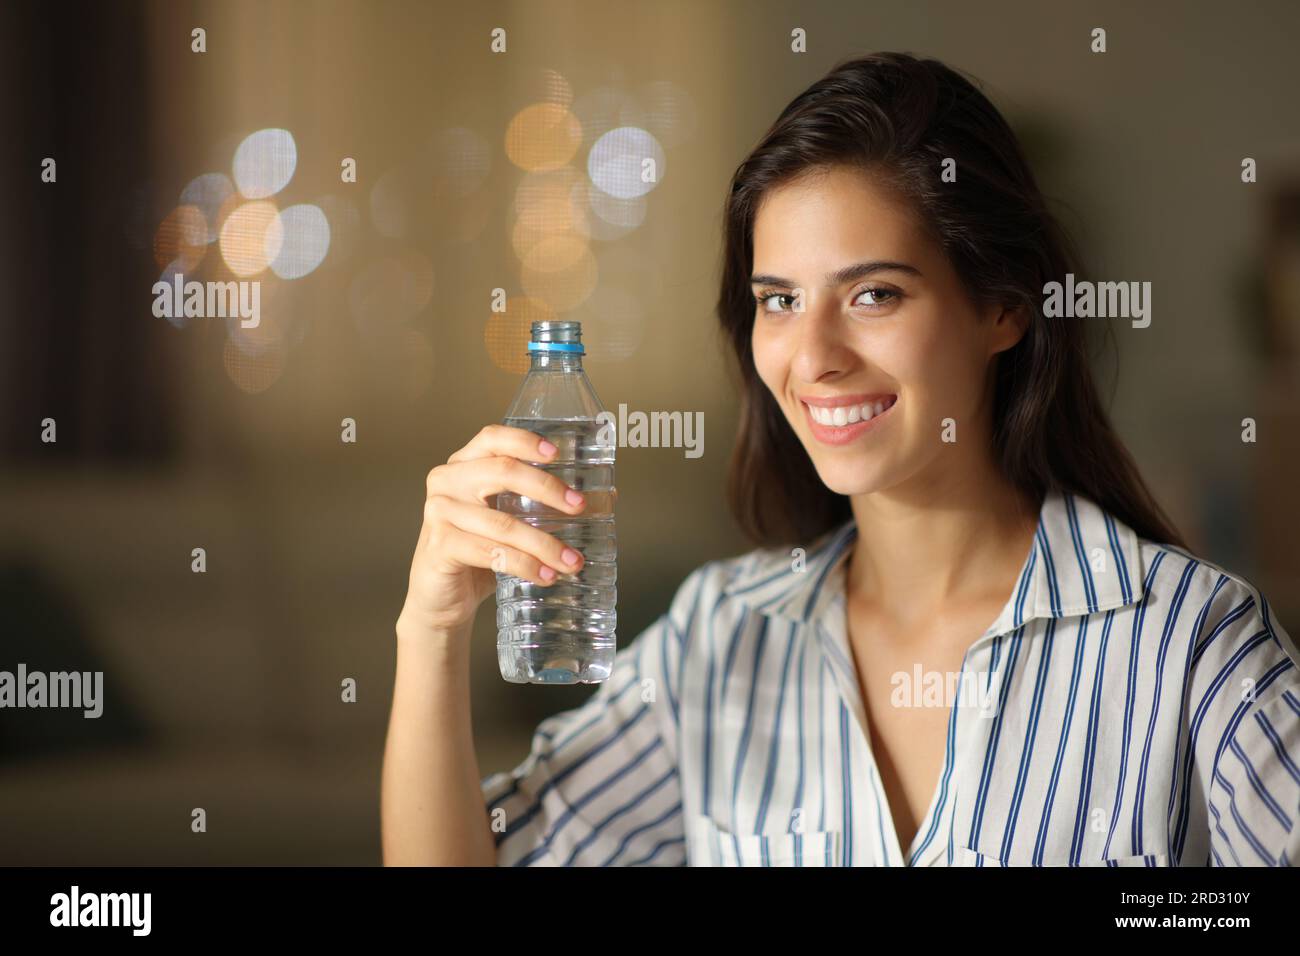 https://c8.alamy.com/comp/2RD310Y/happy-woman-posing-holding-water-bottle-looking-at-camera-at-home-in-the-night-2RD310Y.jpg